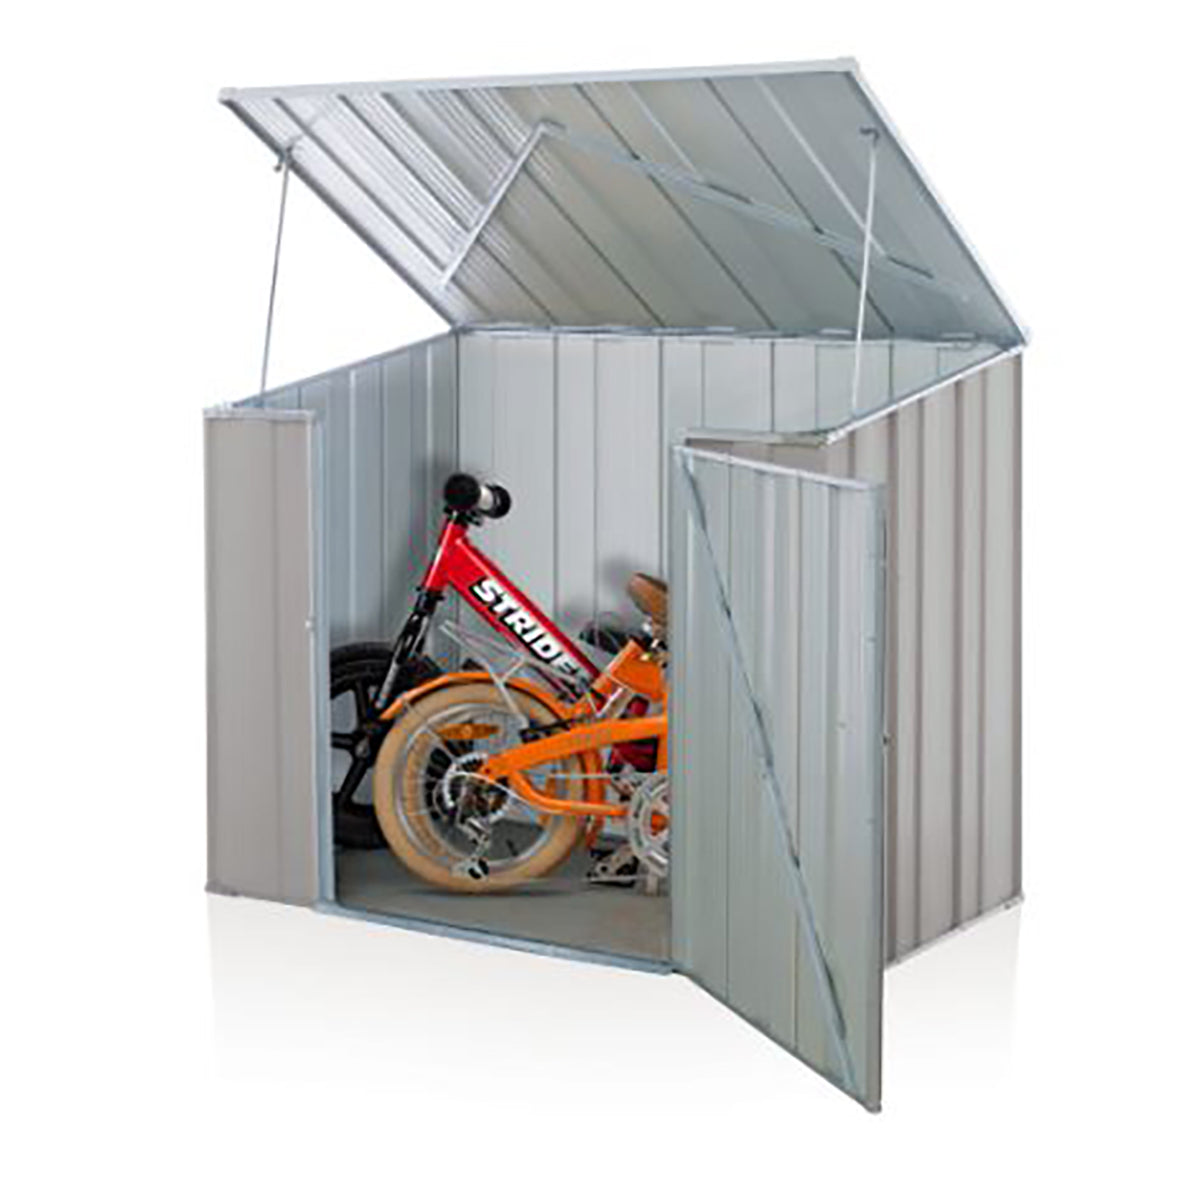 Large Silver Metal Storage Shed for Garden and Backyard